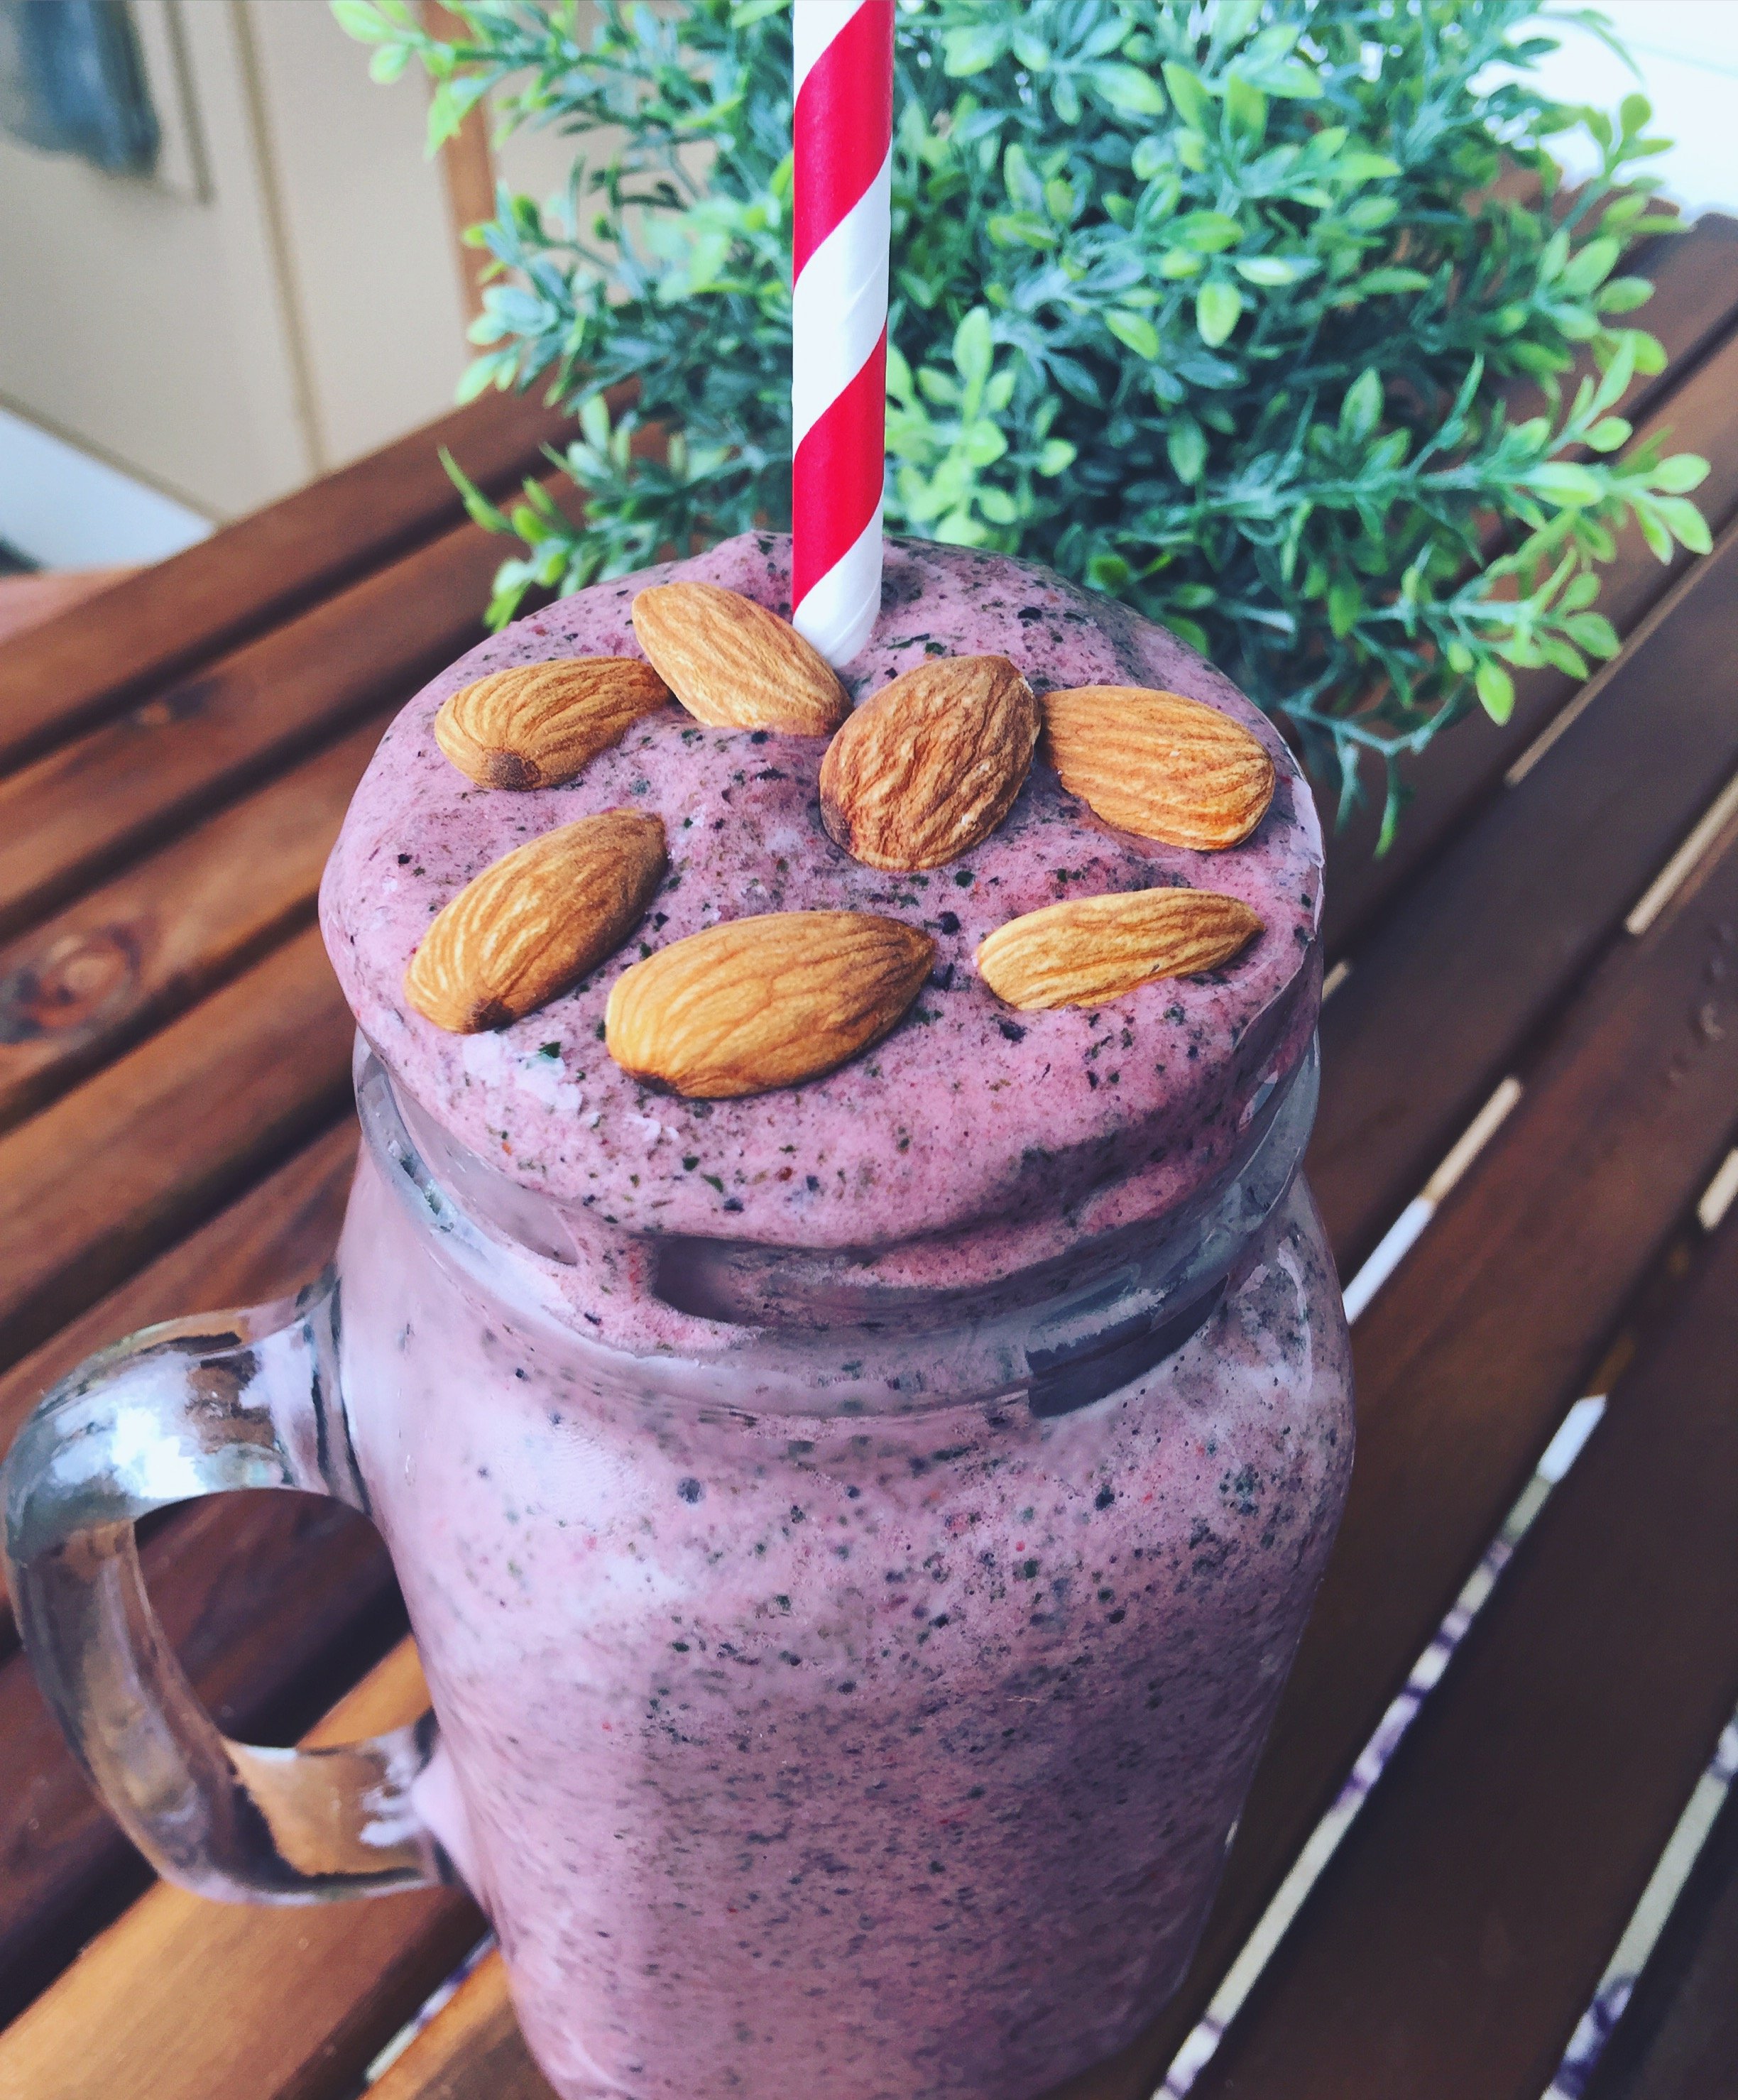 My smoothie is made with frozen blueberries, banana, pineapple, almond milk, spinach, kale, chia seeds & Plant-Based Vanilla Protein Powder! I also topped it with almonds. I love when the almonds sink to the bottom and get super cold! It's like the surprise at the bottom of the cereal box.